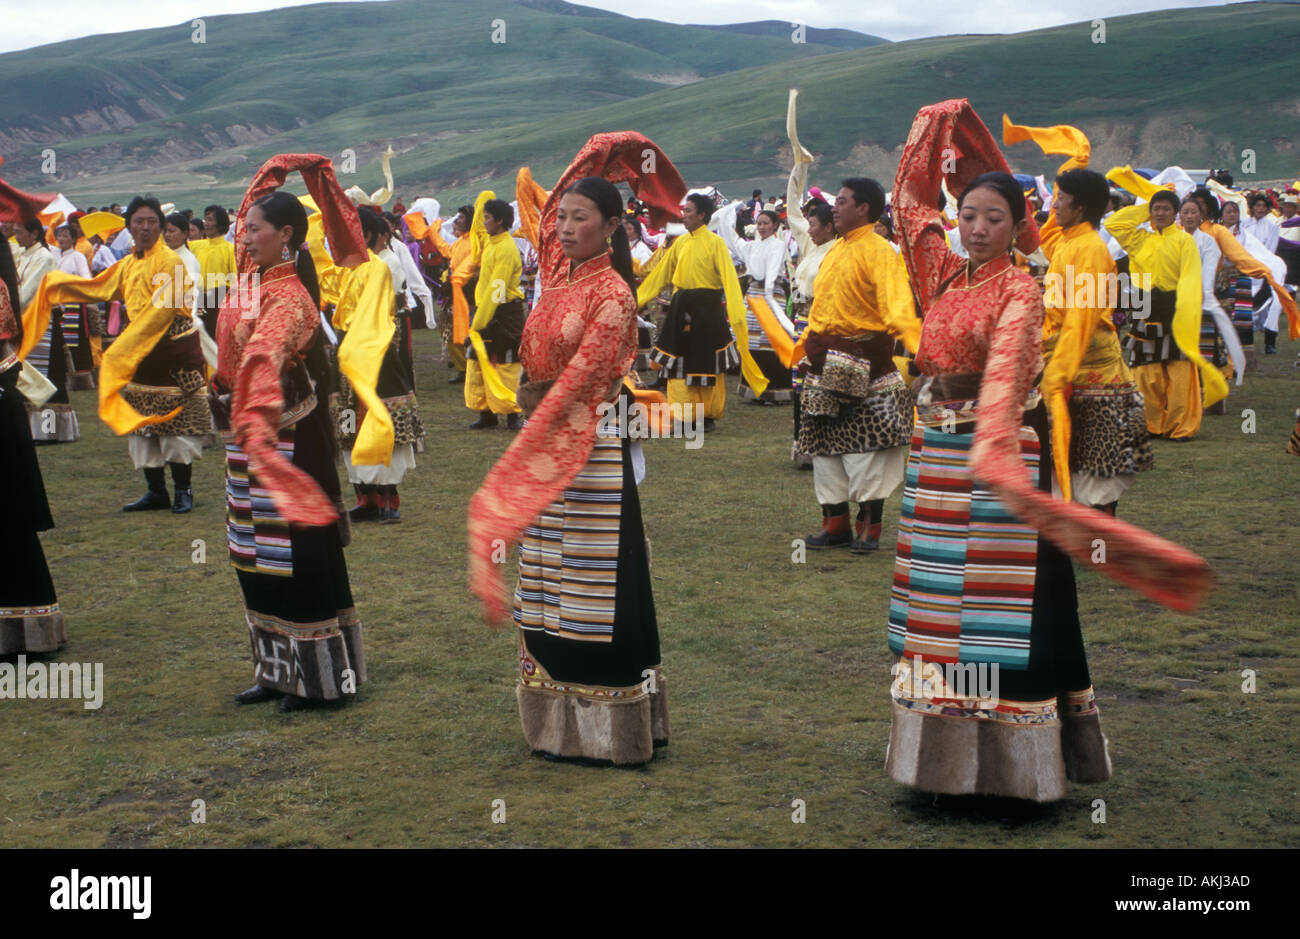 Dance troops preform at the Litang Horse Festival representing various regions of Kham Sichuan Province China Tibet  Stock Photo